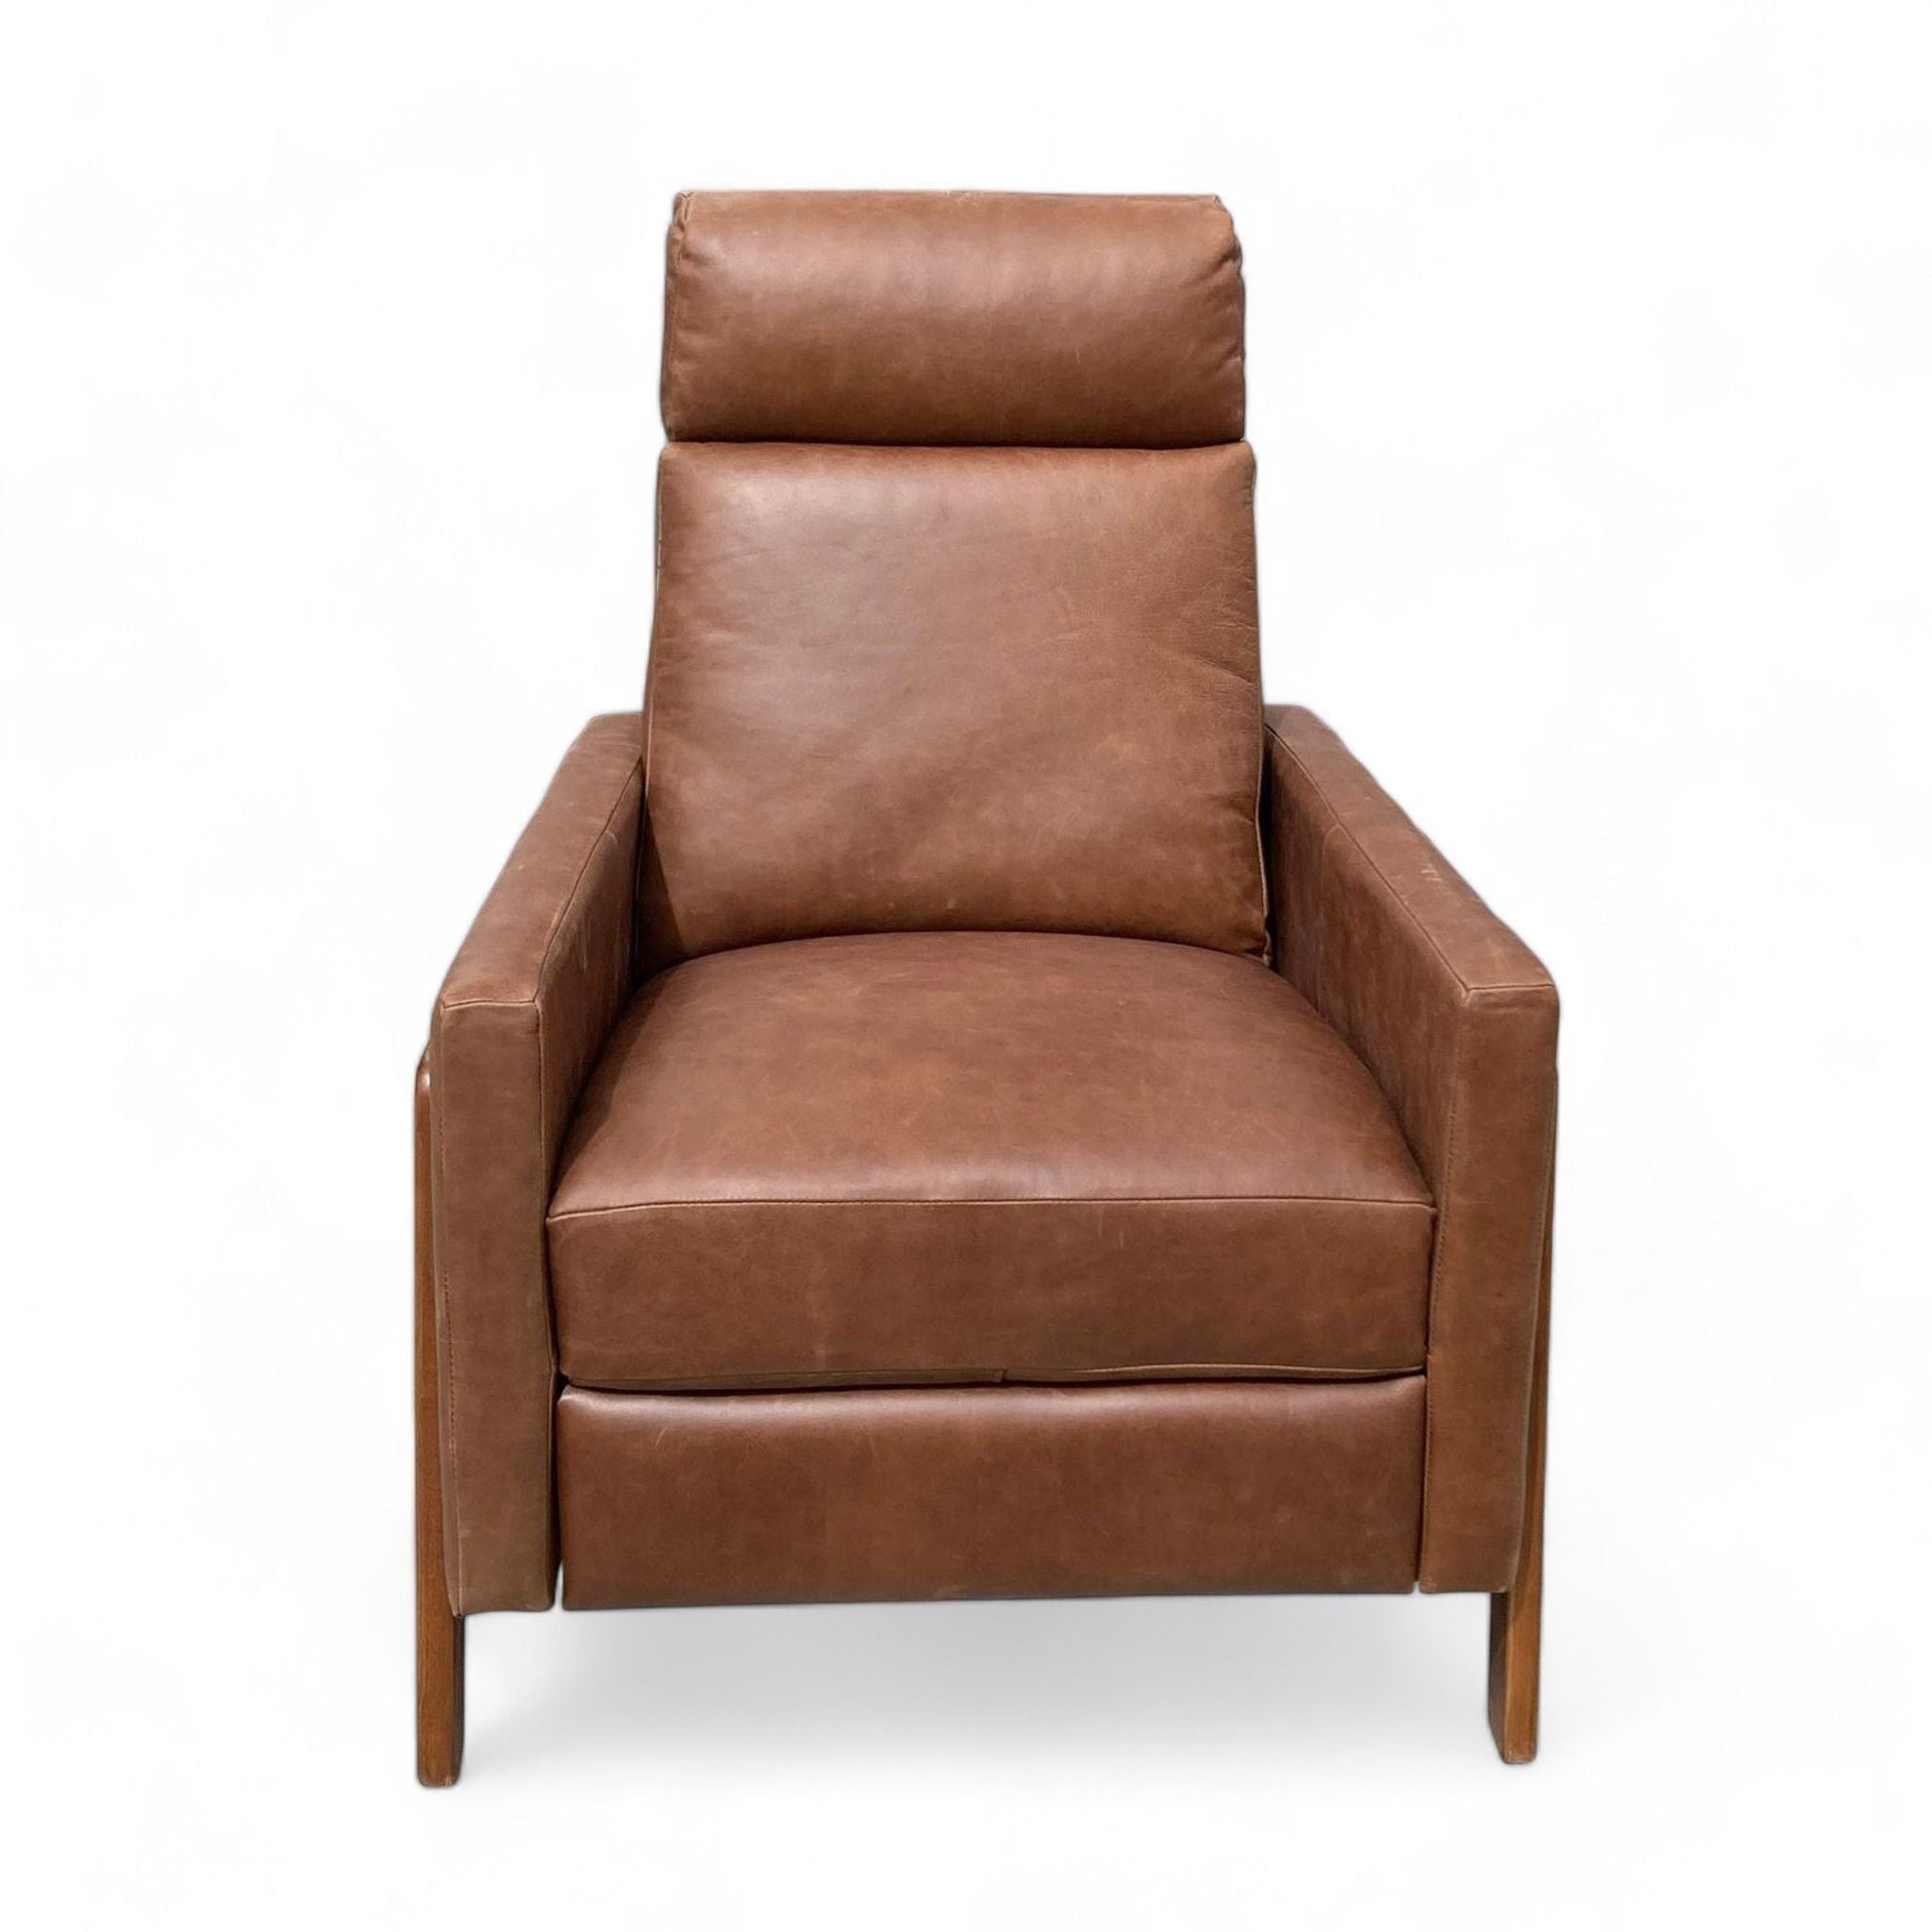 West Elm Spencer Wood-Framed Recliner with leather upholstery and a mid-century design on a white background.